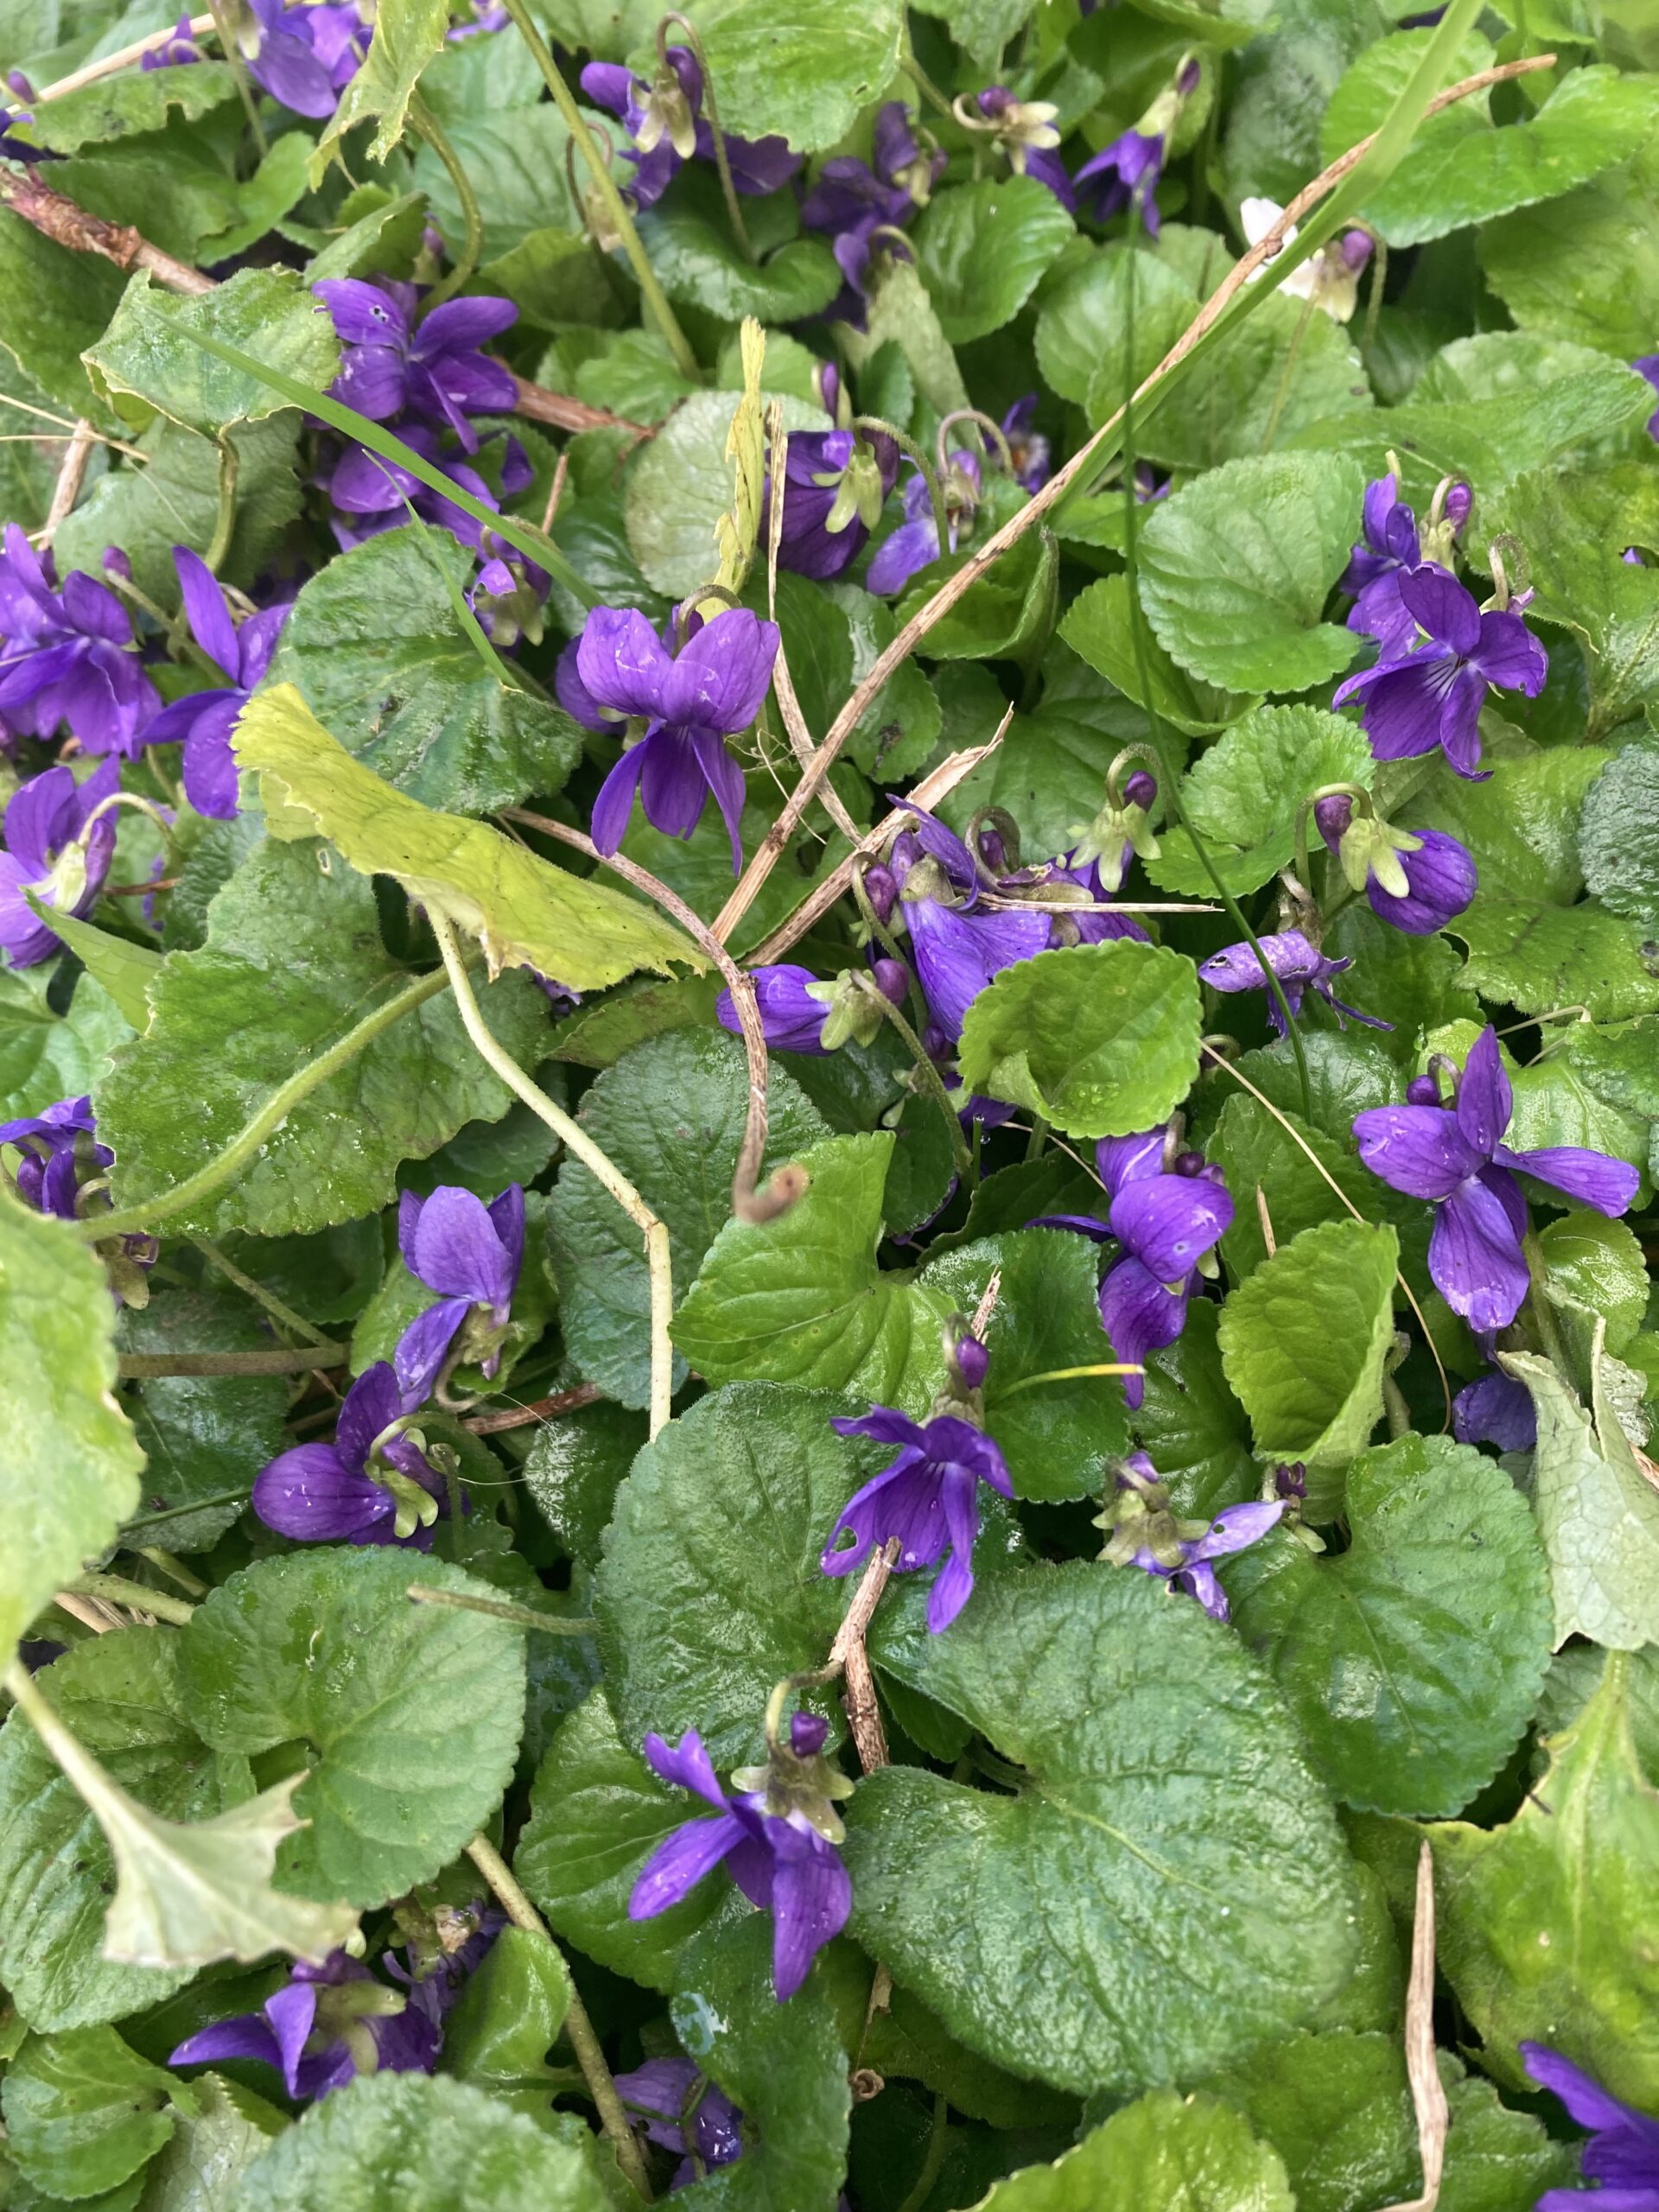 Spring purple violet flowers nestled among their heart shaped leaves.